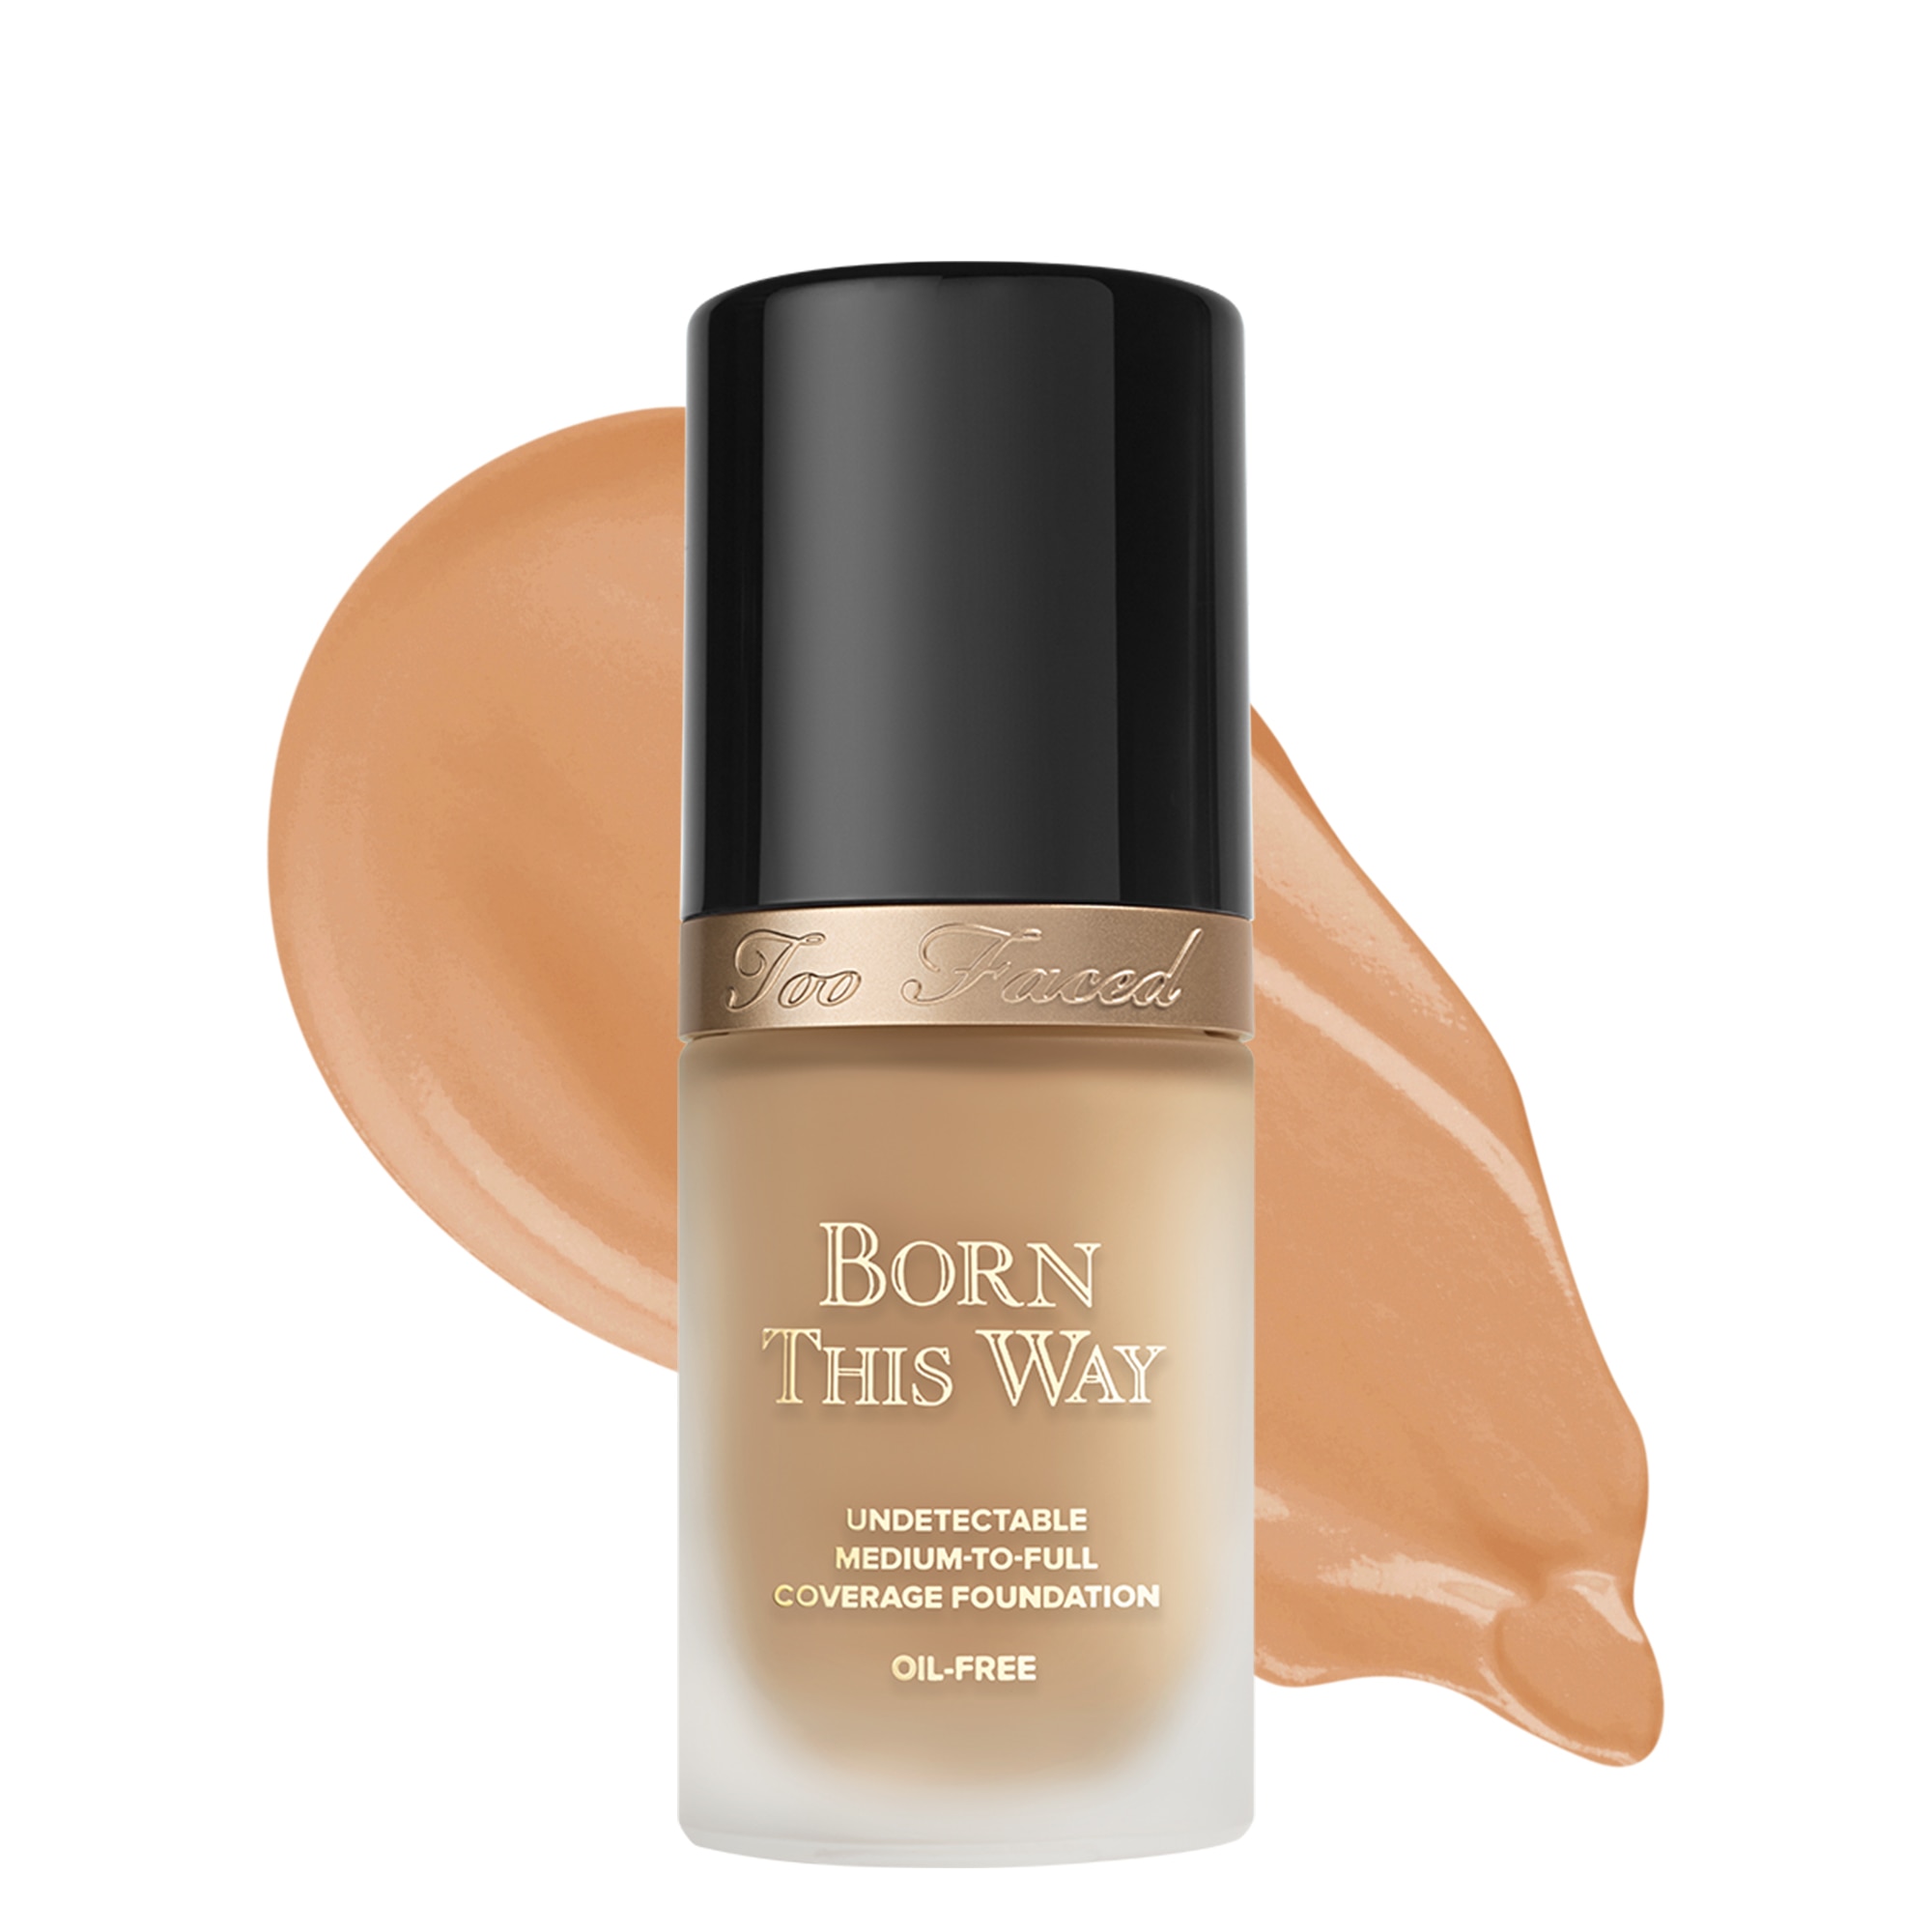 Icon image of Born This Way Flawless Coverage Natural Finish Foundation for side-by-side ingredient comparison.